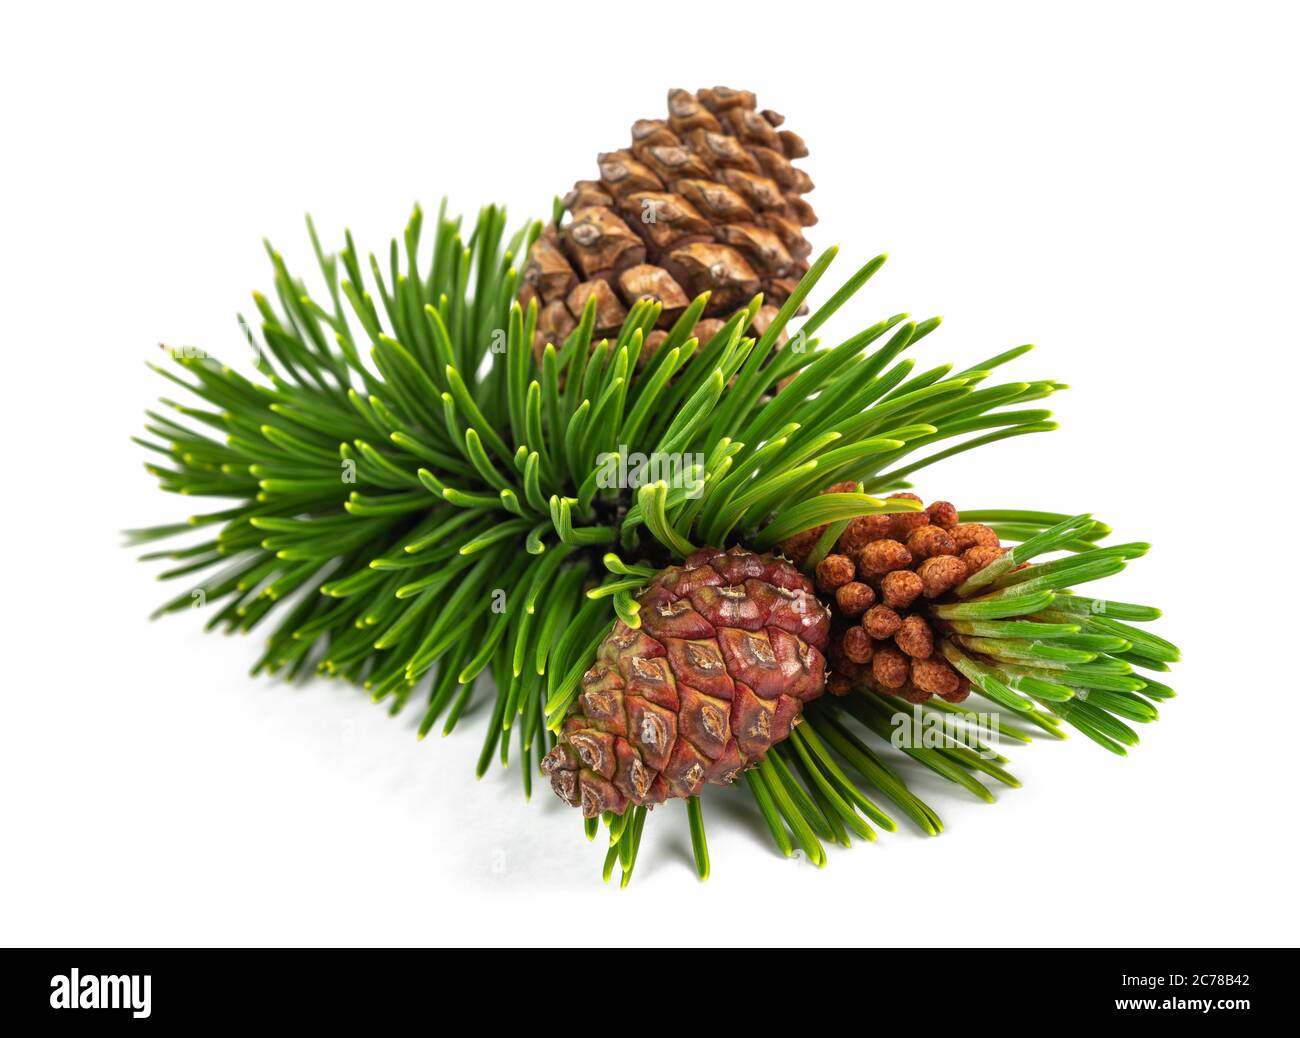 Mugo pine branch with cones  isolated on white background Stock Photo